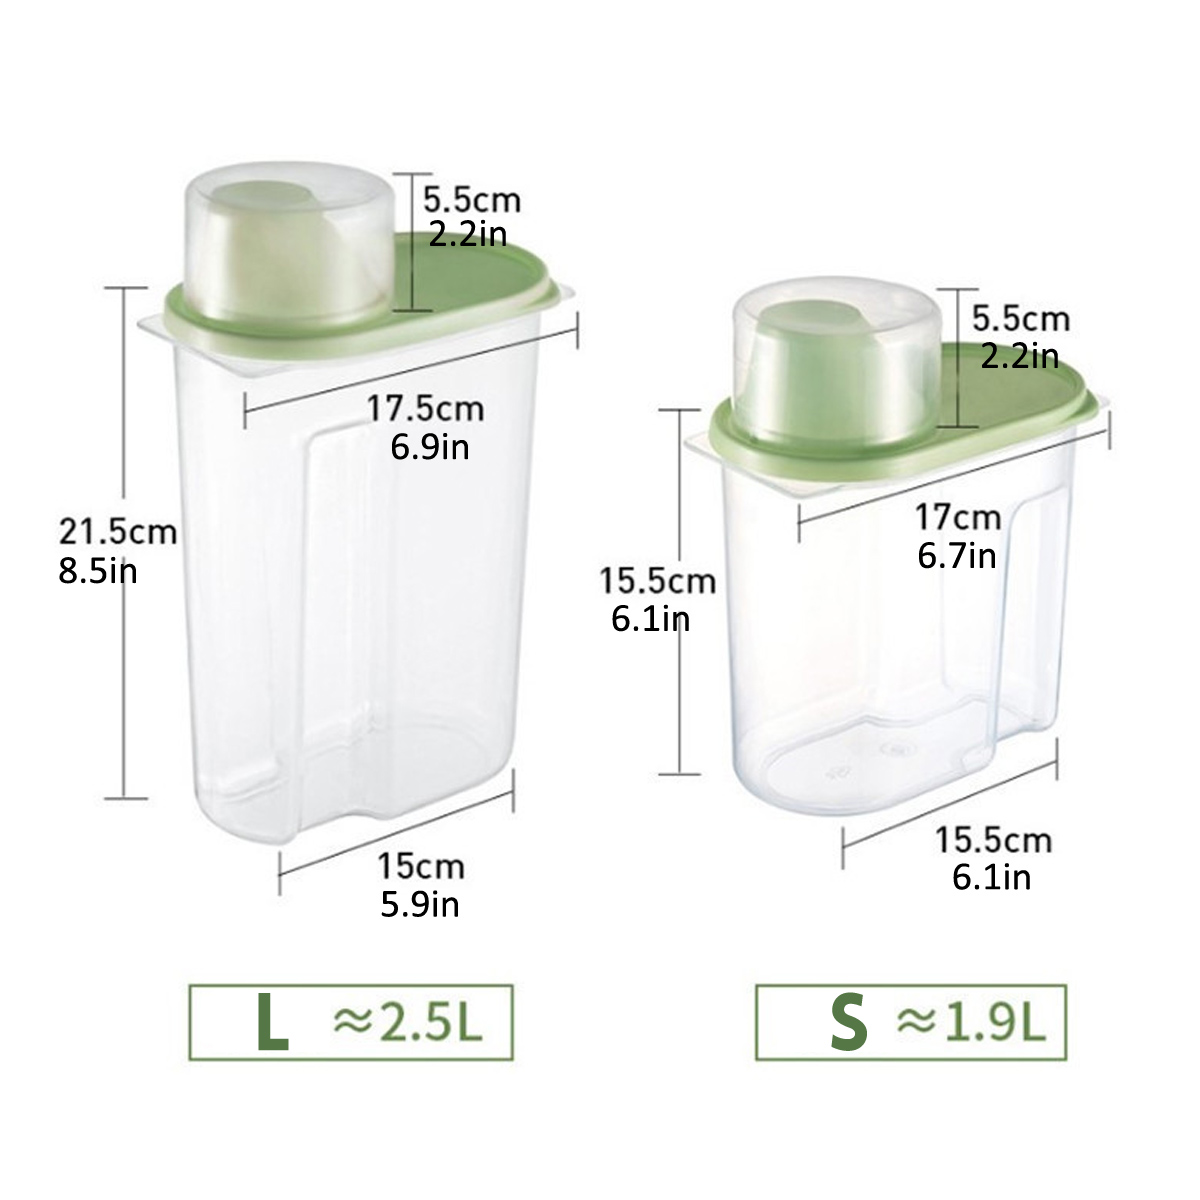 4Pcs-Cereal-Storage-Box-Plastic-Rice-Container-Food-Sealed-Jar-Cans-Kitchen-Grain-Dried-Fruit-Snacks-1730653-11